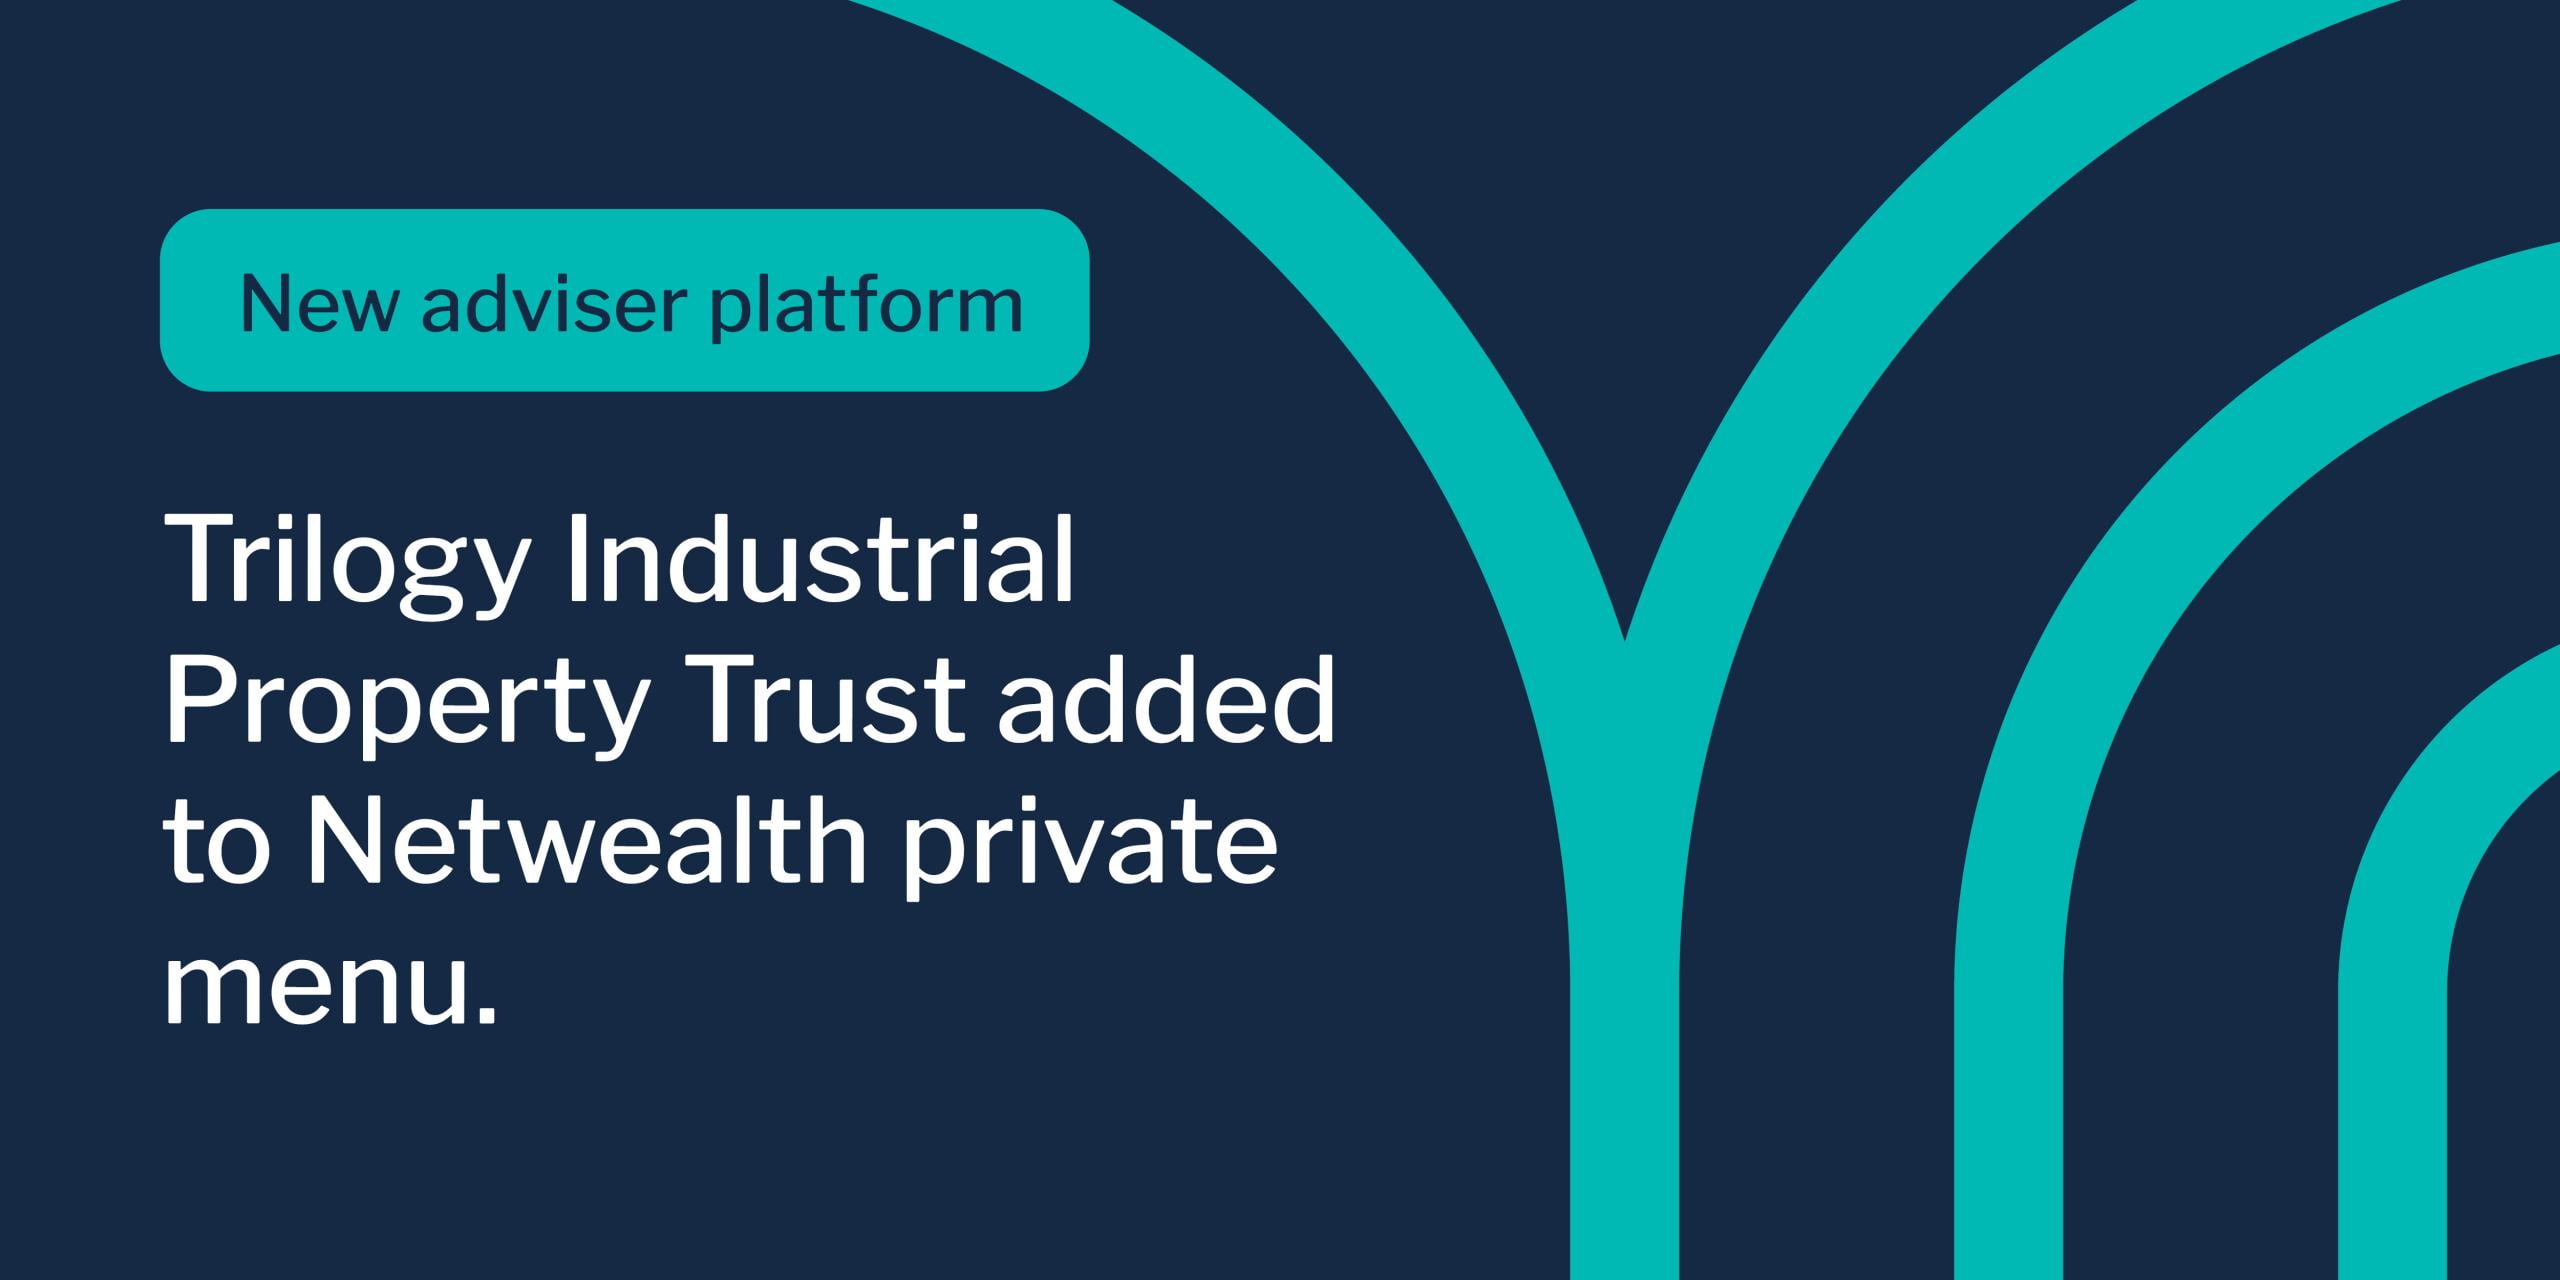 Trilogy Industrial Property Trust added to Netwealth private menu | Trilogy Funds